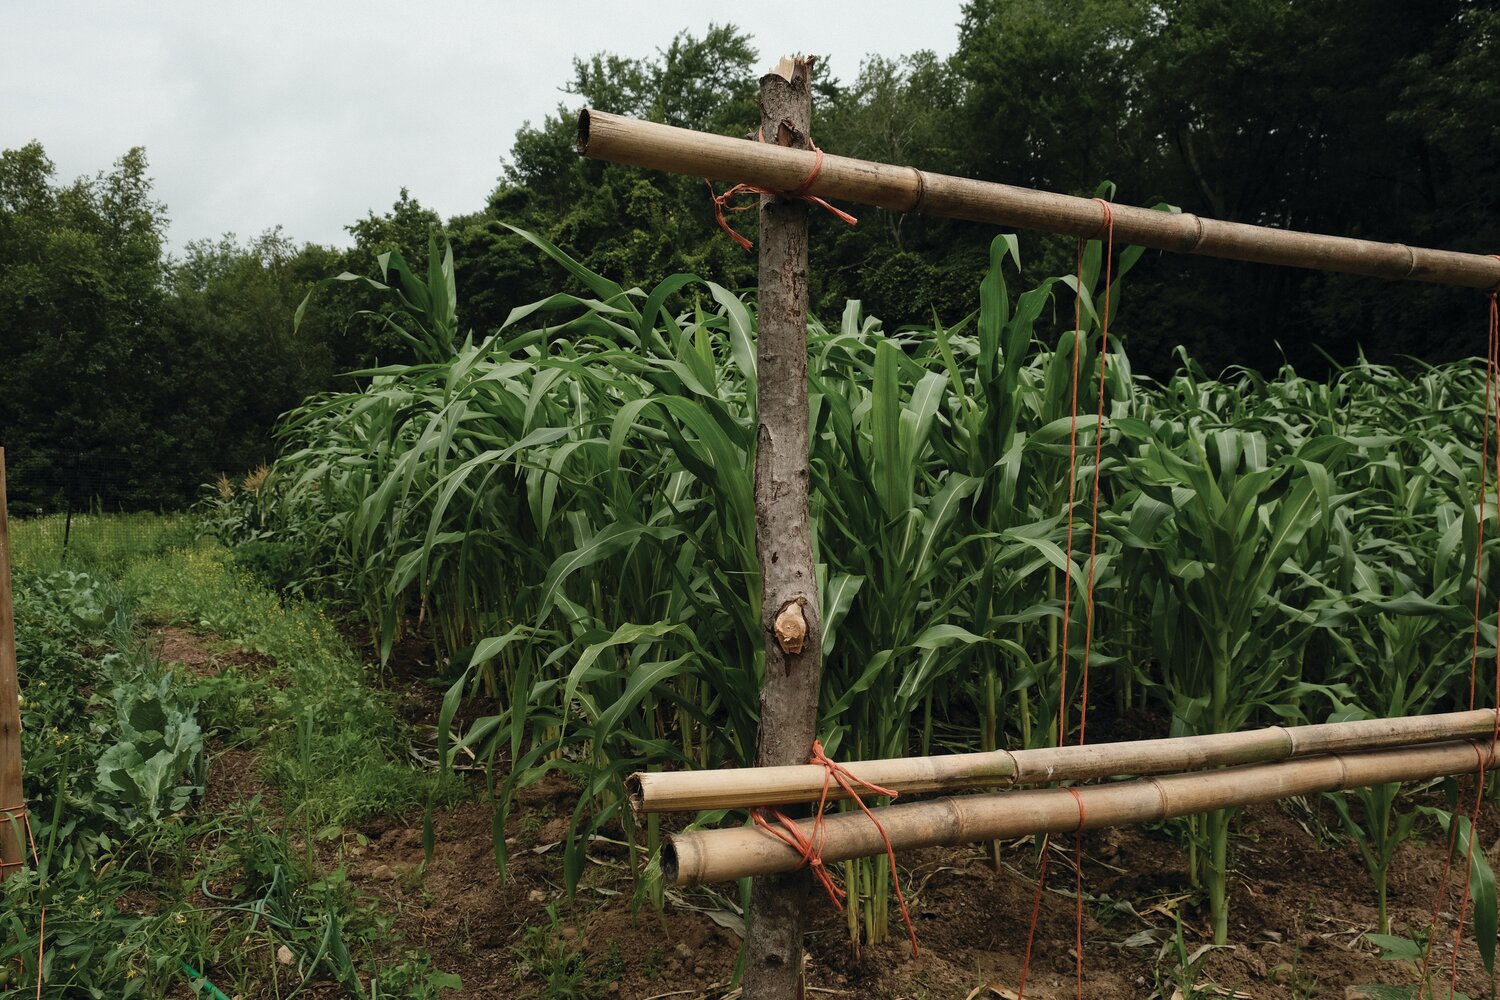 HIGH STAKES: Bean stalks are propped up with stakes and cut branches. Beans and low-plants like squash are often planted together at the farm, and have a symbiotic relationship.